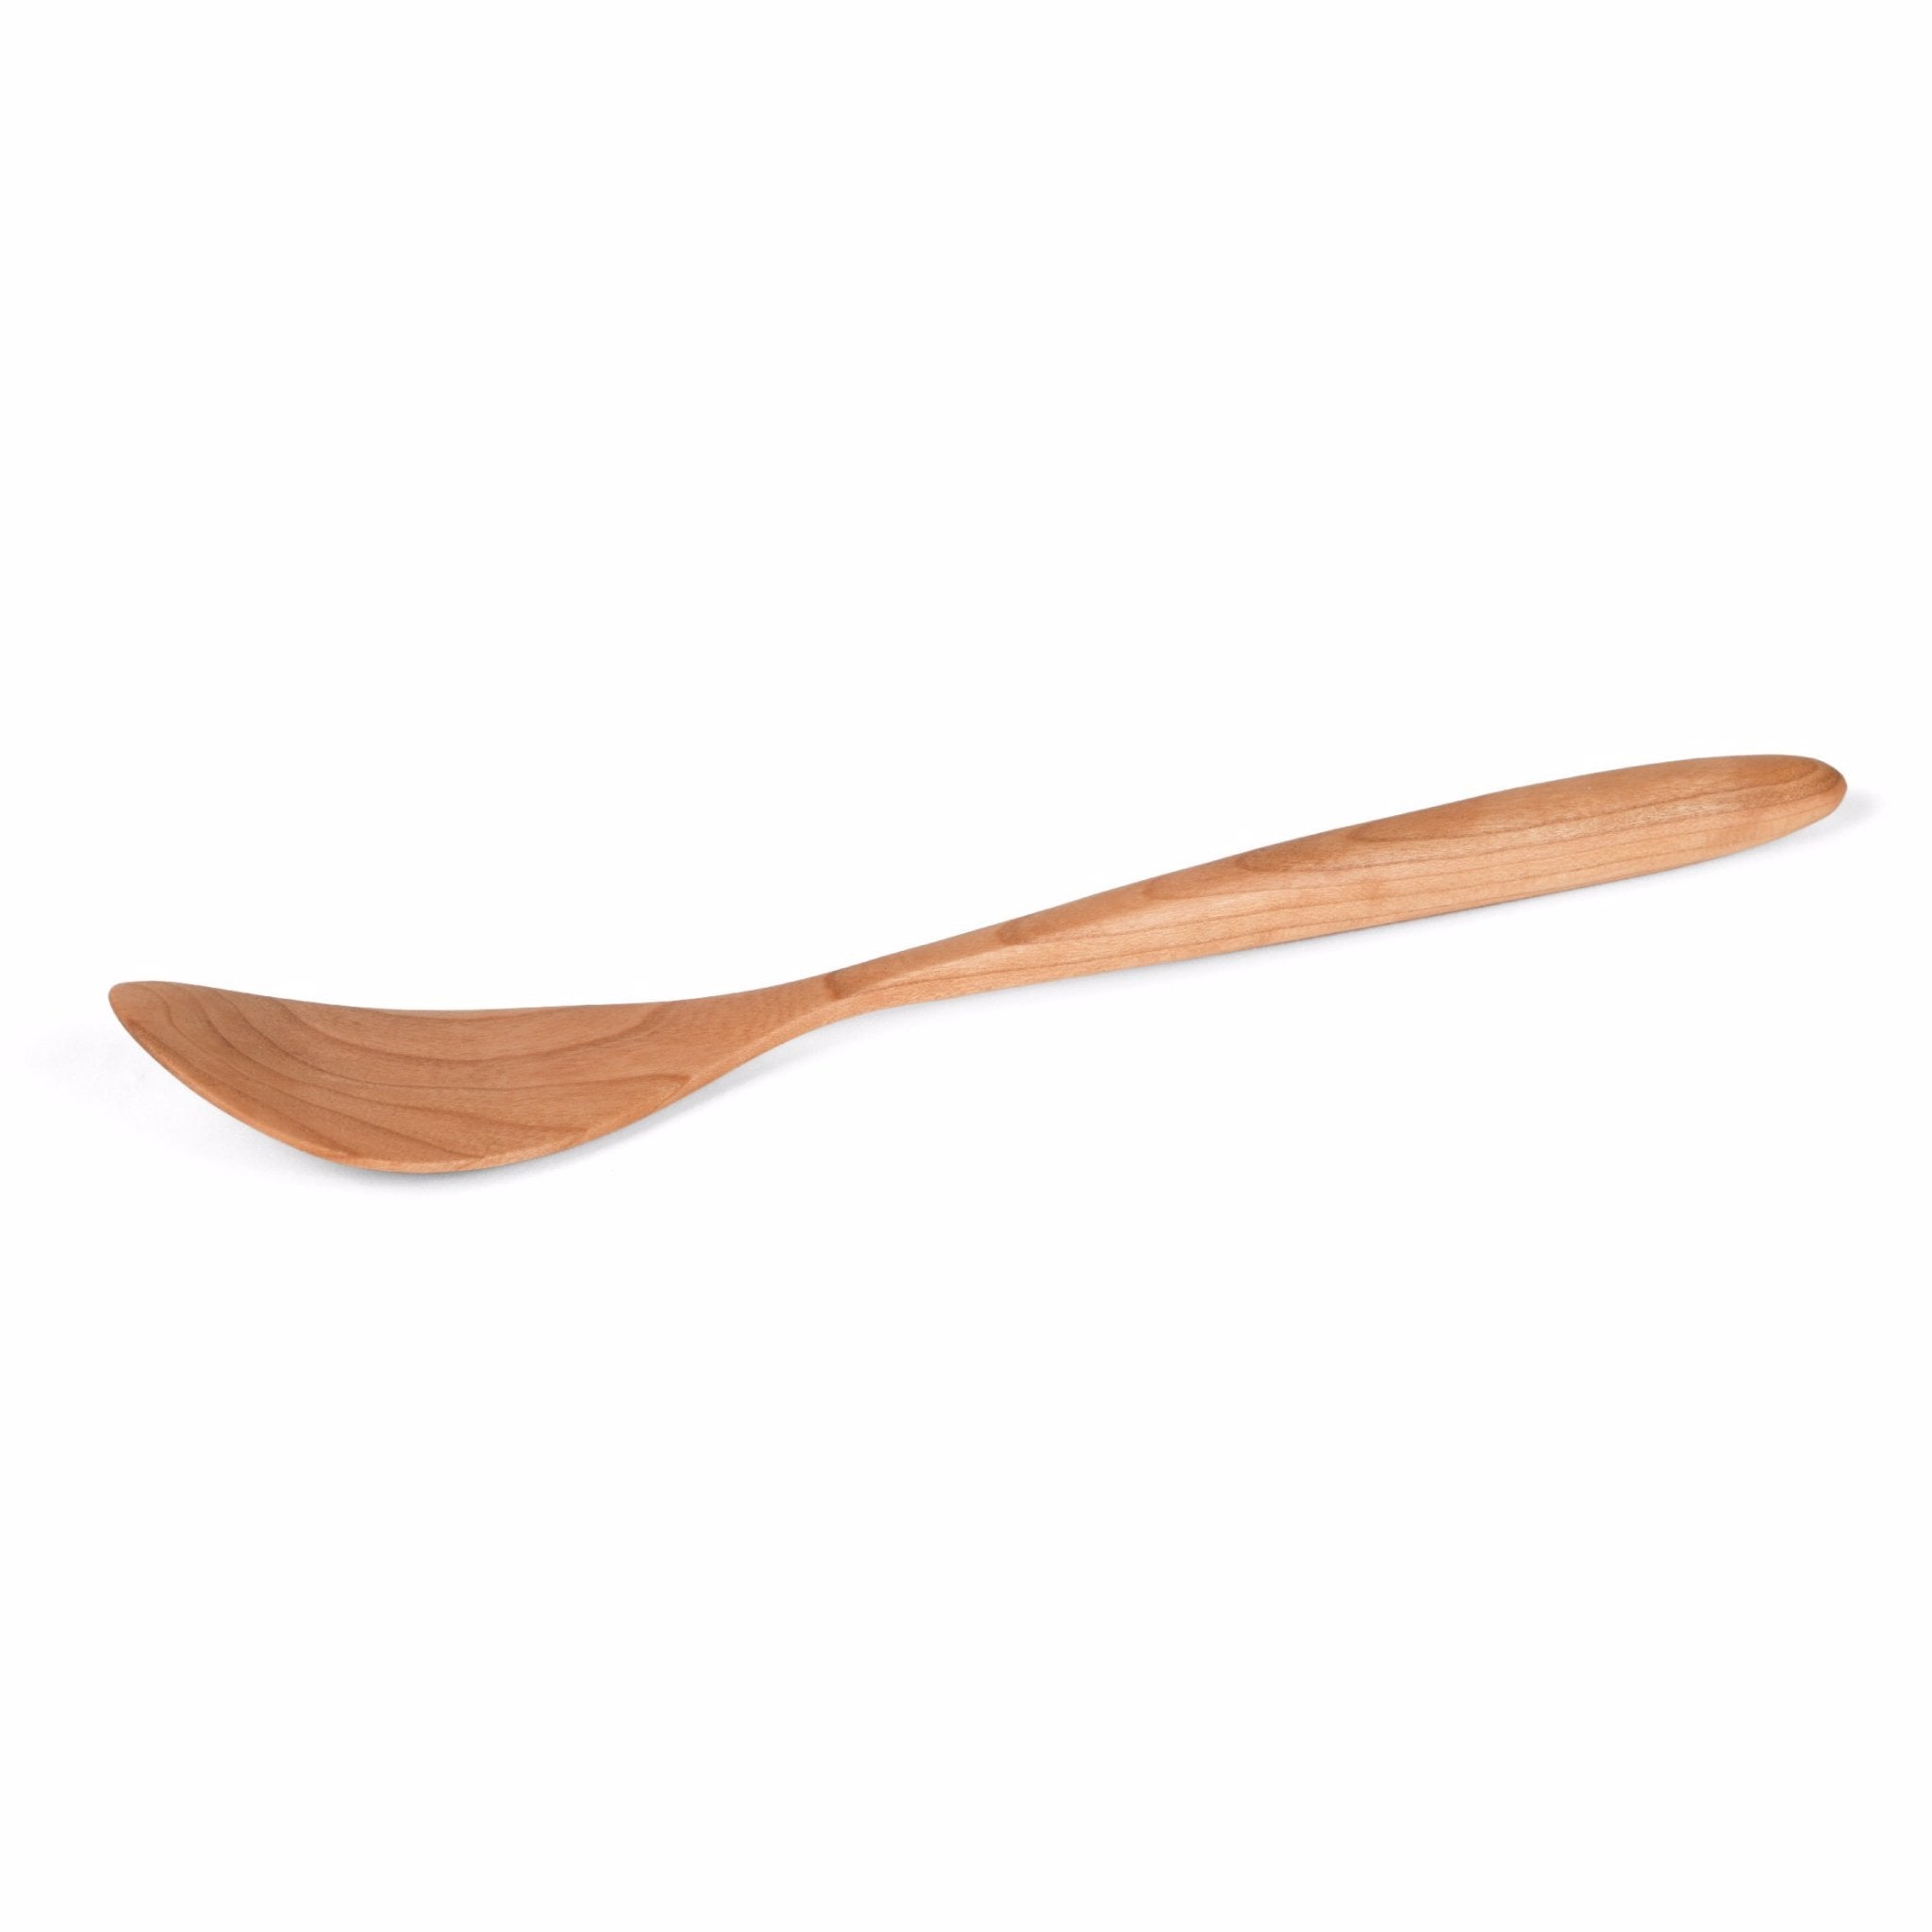 Artisan Crafted Cherry Wood Stirring Spoons by Rockledge Farm